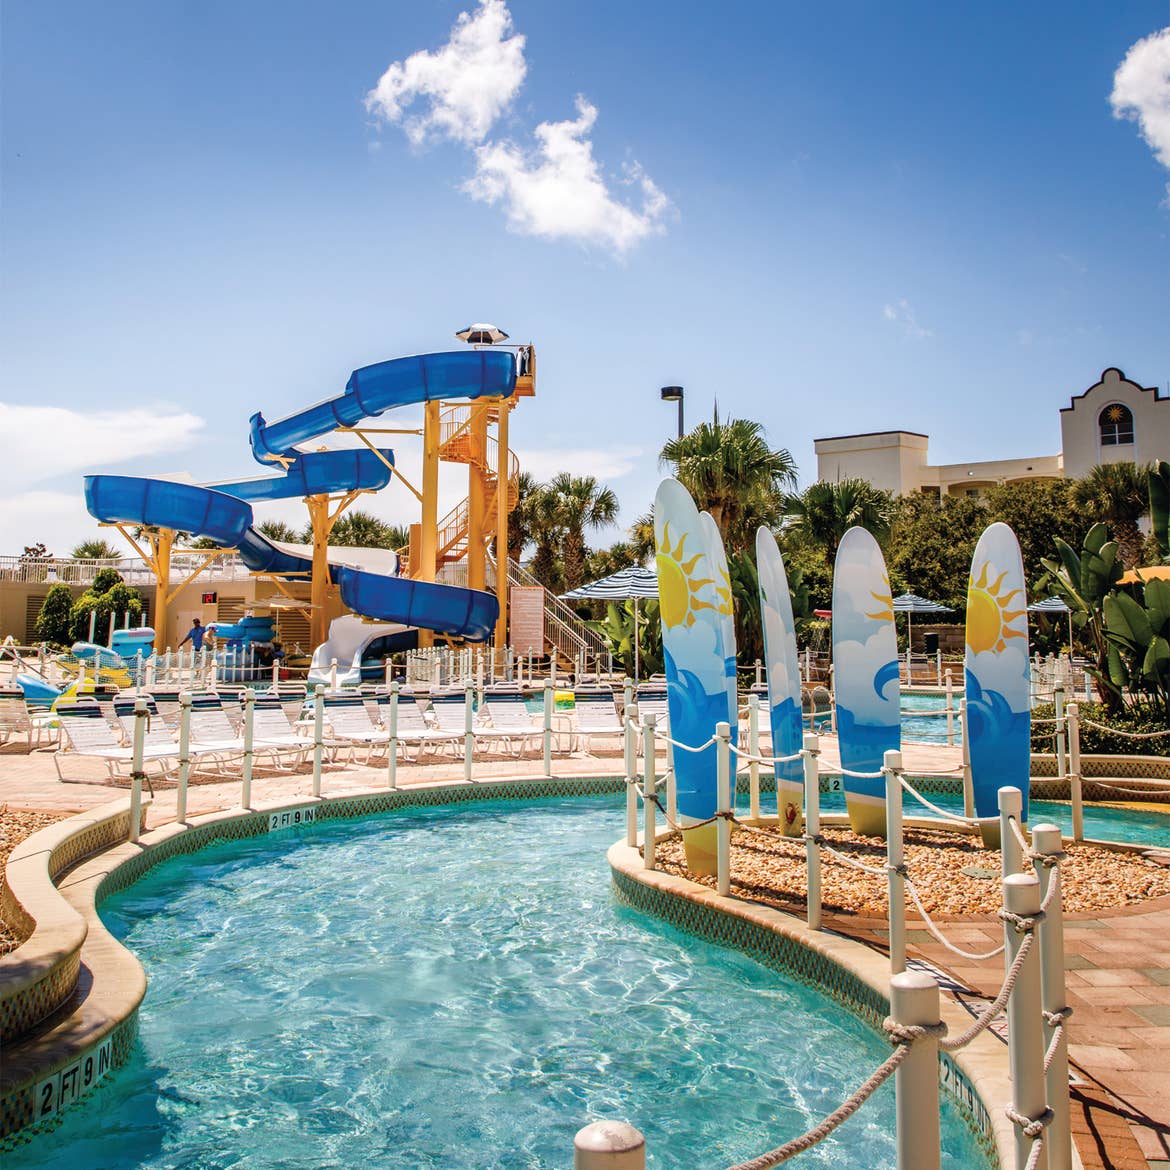 Lazy river with waterslide in the background at Cape Canaveral Beach Resort.